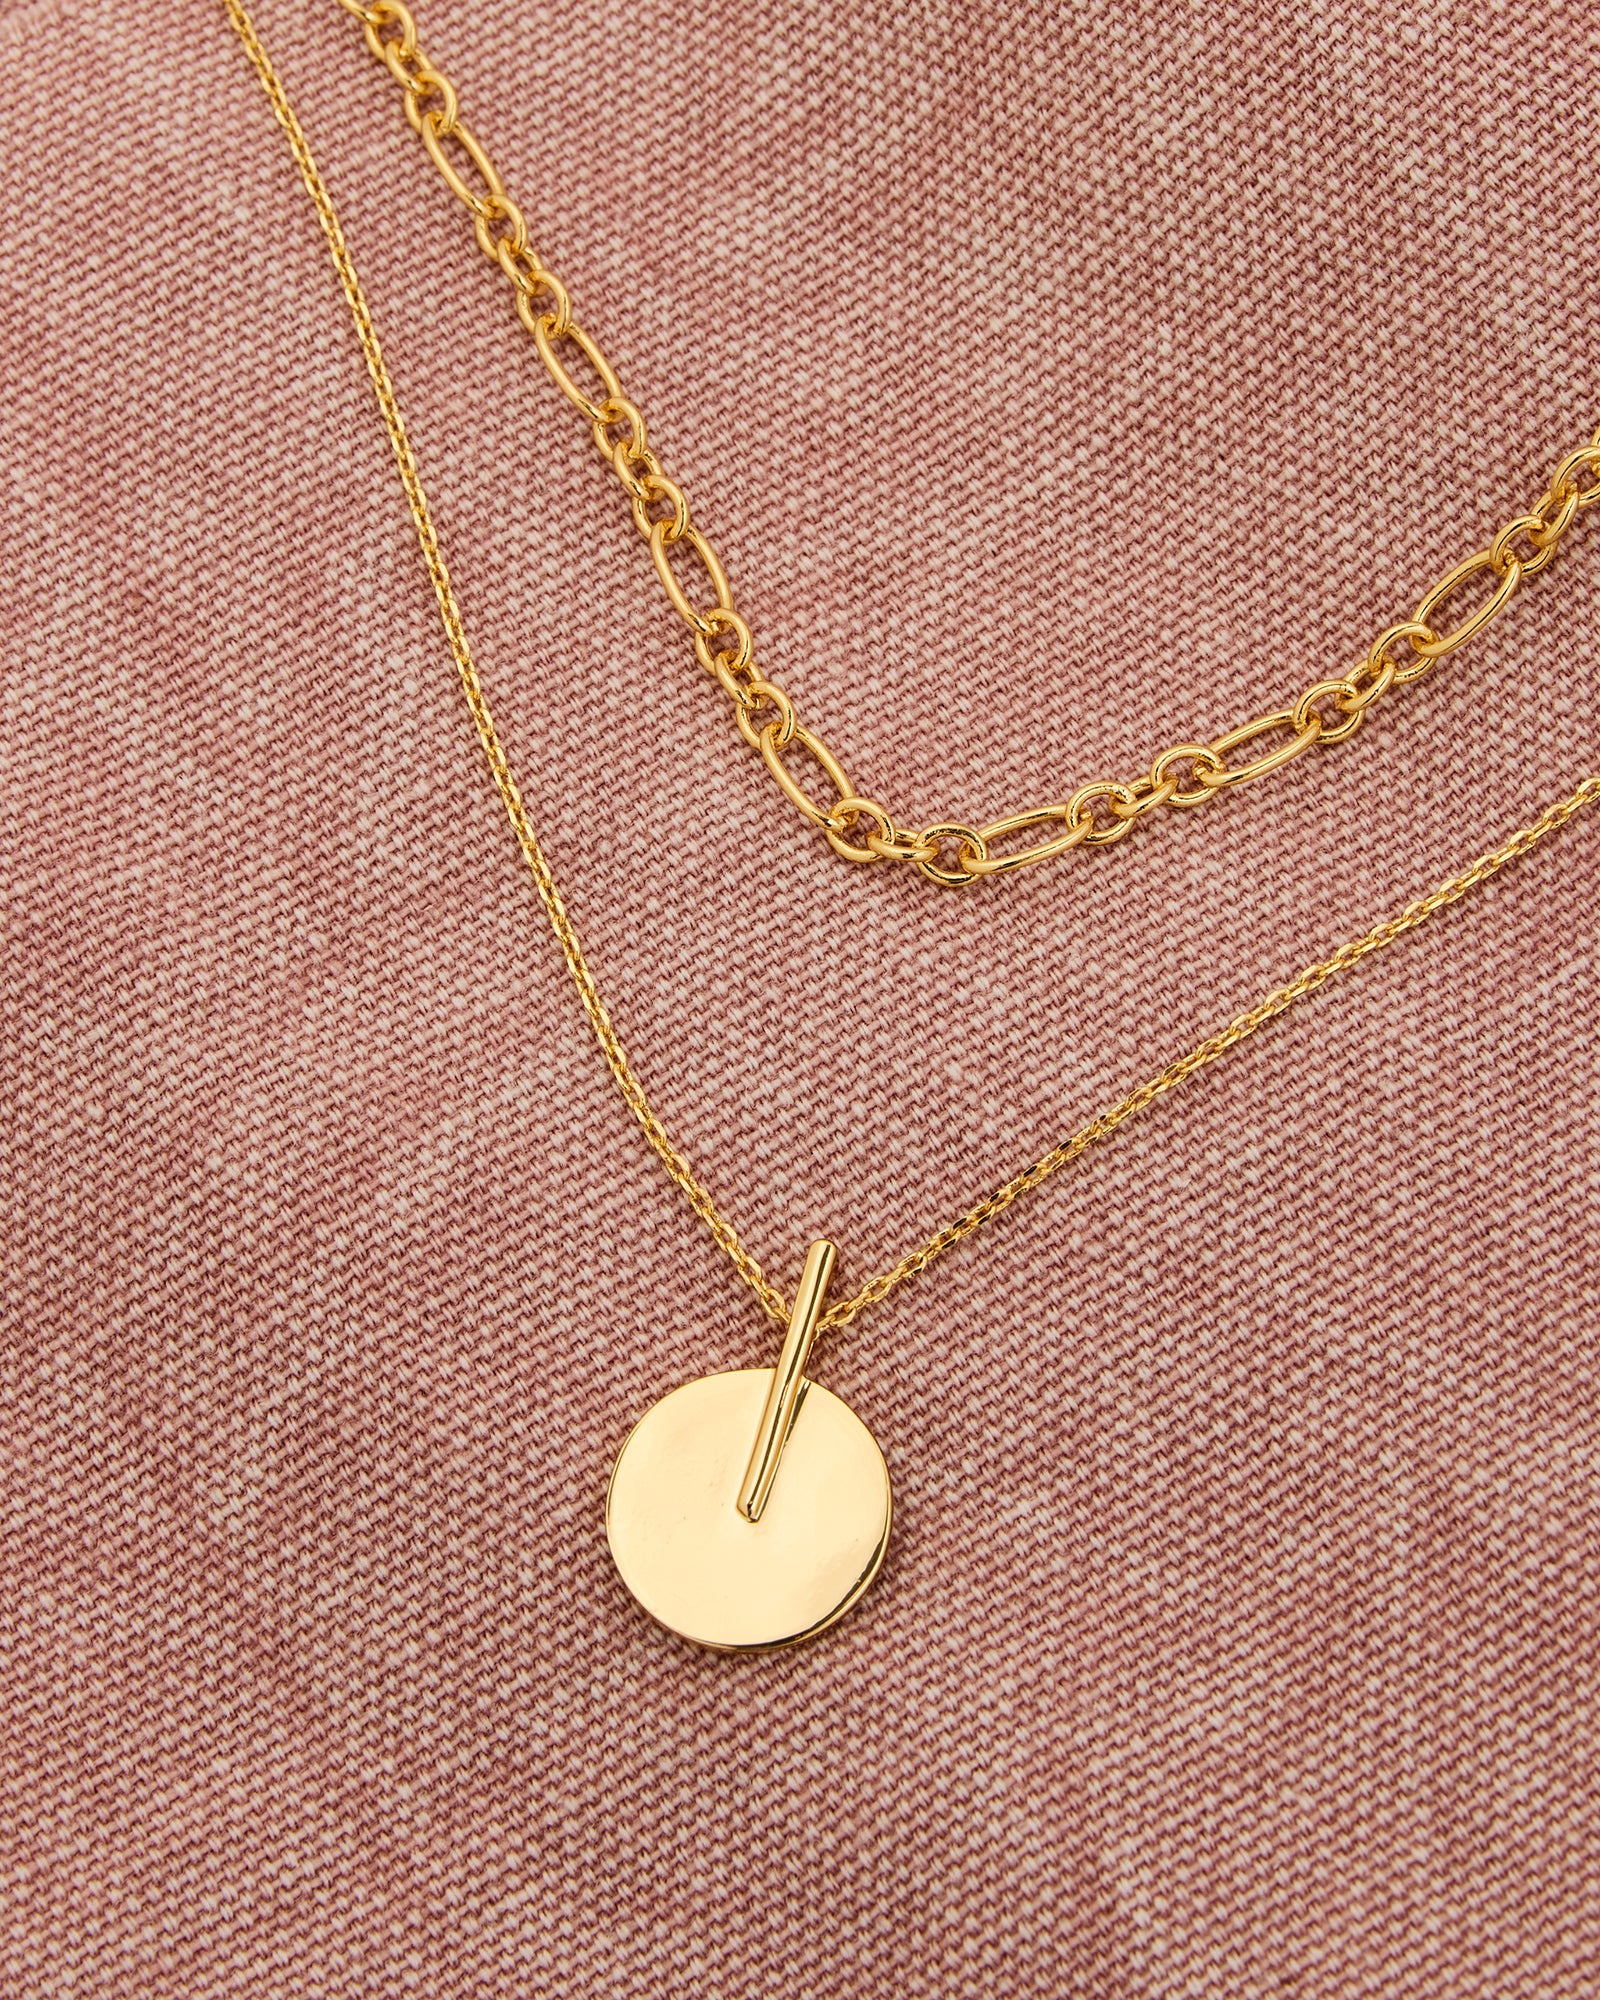 Gold chain necklaces with a circle charm on longer chain